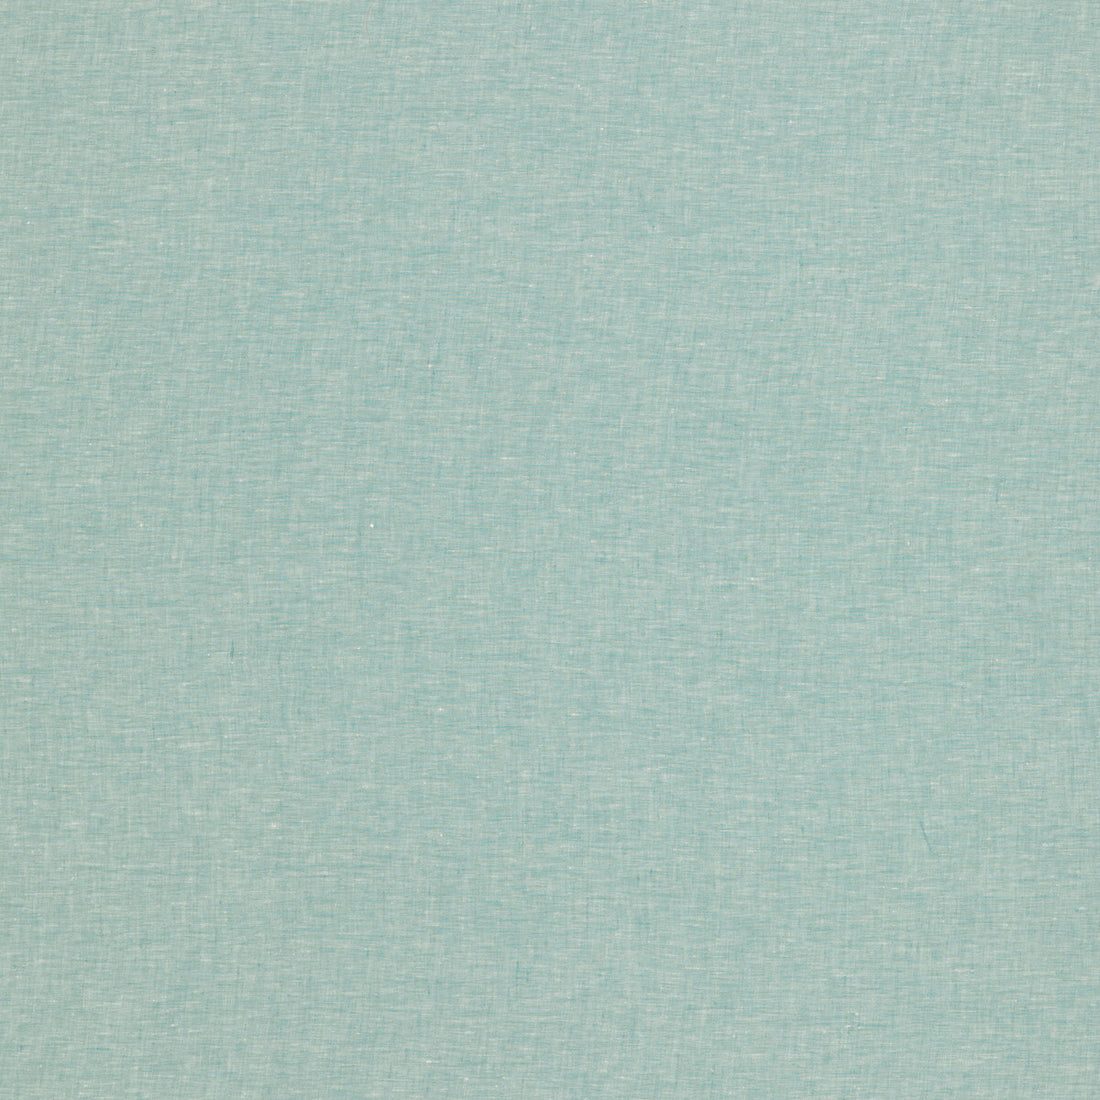 Nala Linen fabric in aqua color - pattern ED85329.725.0 - by Threads in the Nala Linens collection